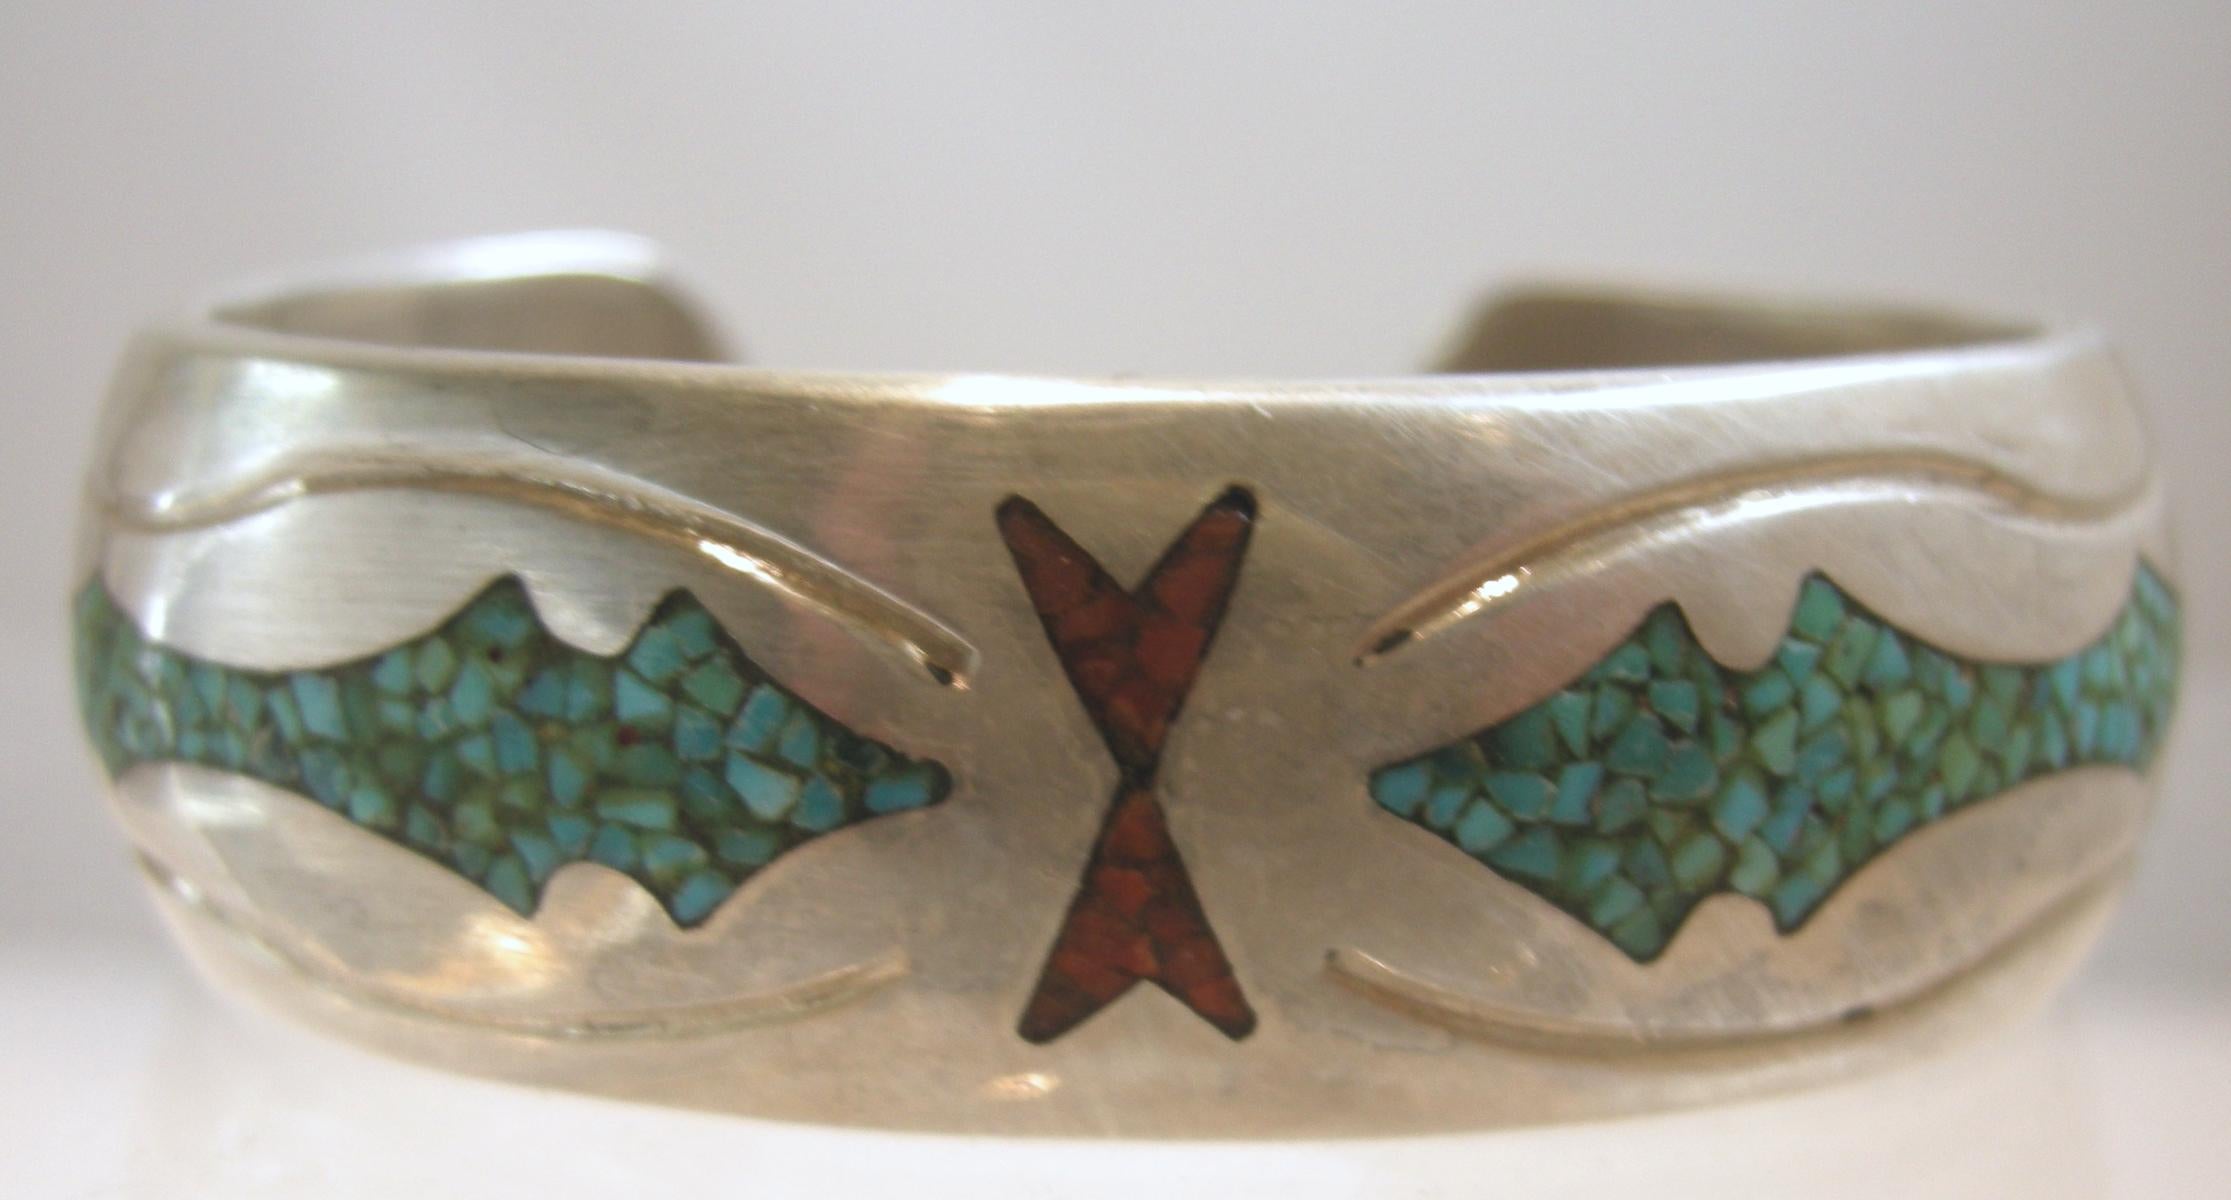 This vintage signed CLJ Navajo cuff combines turquoise & coral inlay onto a sterling silver bracelet.   In excellent condition, this piece measures 6” around the inside x 3/4” and is signed “CLJ NAVAJO”.